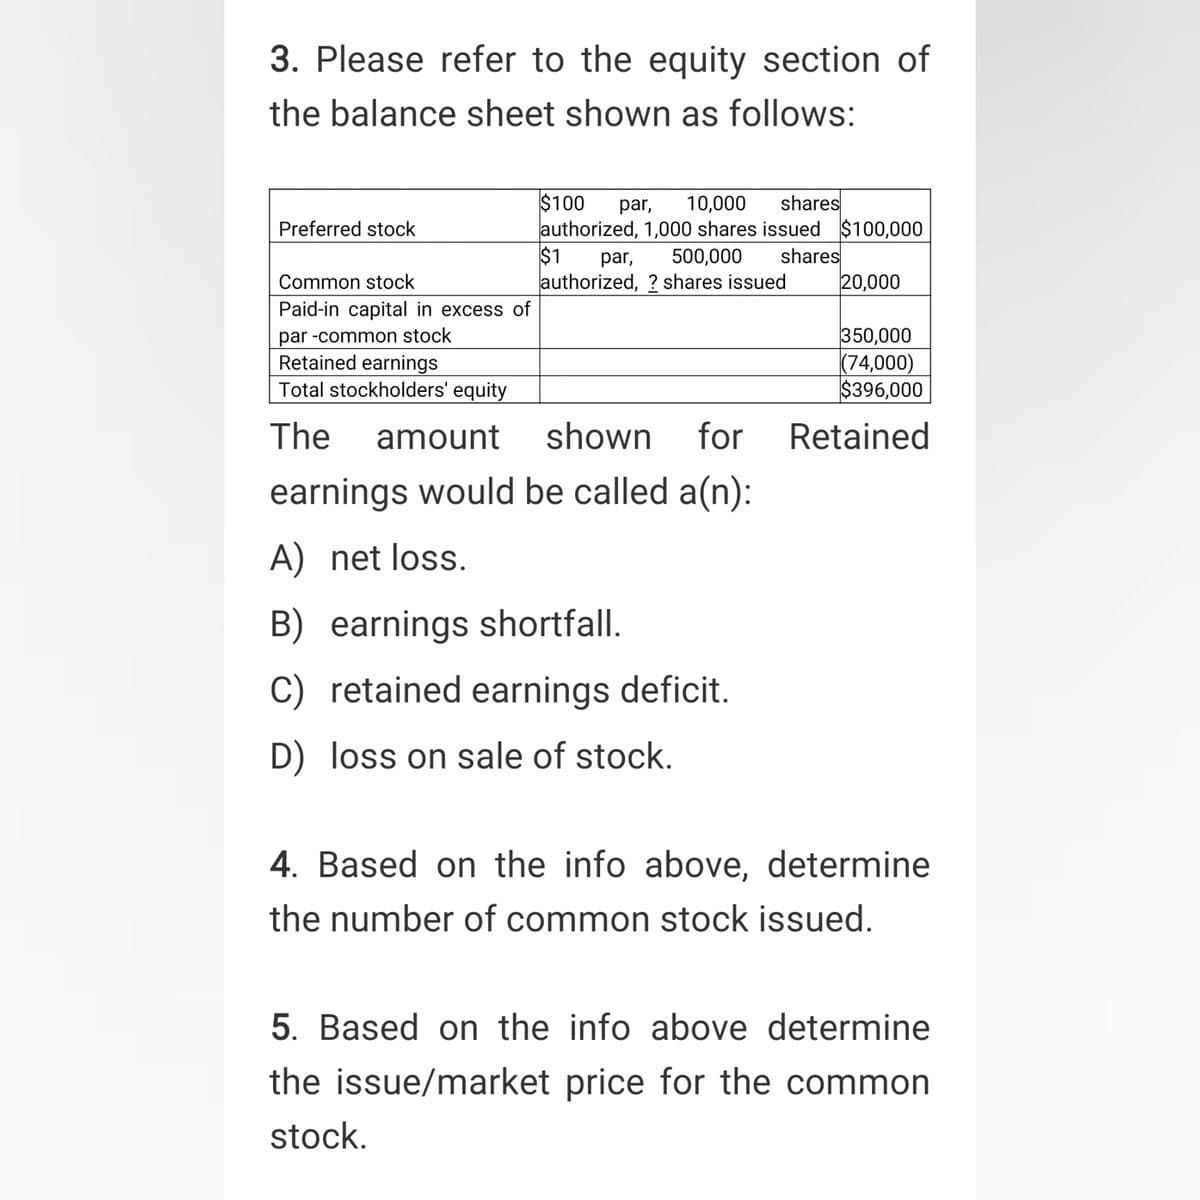 3. Please refer to the equity section of
the balance sheet shown as follows:
Preferred stock
Common stock
Paid-in capital in excess of
par -common stock
$100 par, 10,000 shares
authorized, 1,000 shares issued $100,000
$1
par, 500,000 shares
authorized,? shares issued
Retained earnings
Total stockholders' equity
The amount shown for
earnings would be called a(n):
A) net loss.
B) earnings shortfall.
C) retained earnings deficit.
D) loss on sale of stock.
20,000
350,000
(74,000)
$396,000
Retained
4. Based on the info above, determine
the number of common stock issued.
5. Based on the info above determine
the issue/market price for the common
stock.